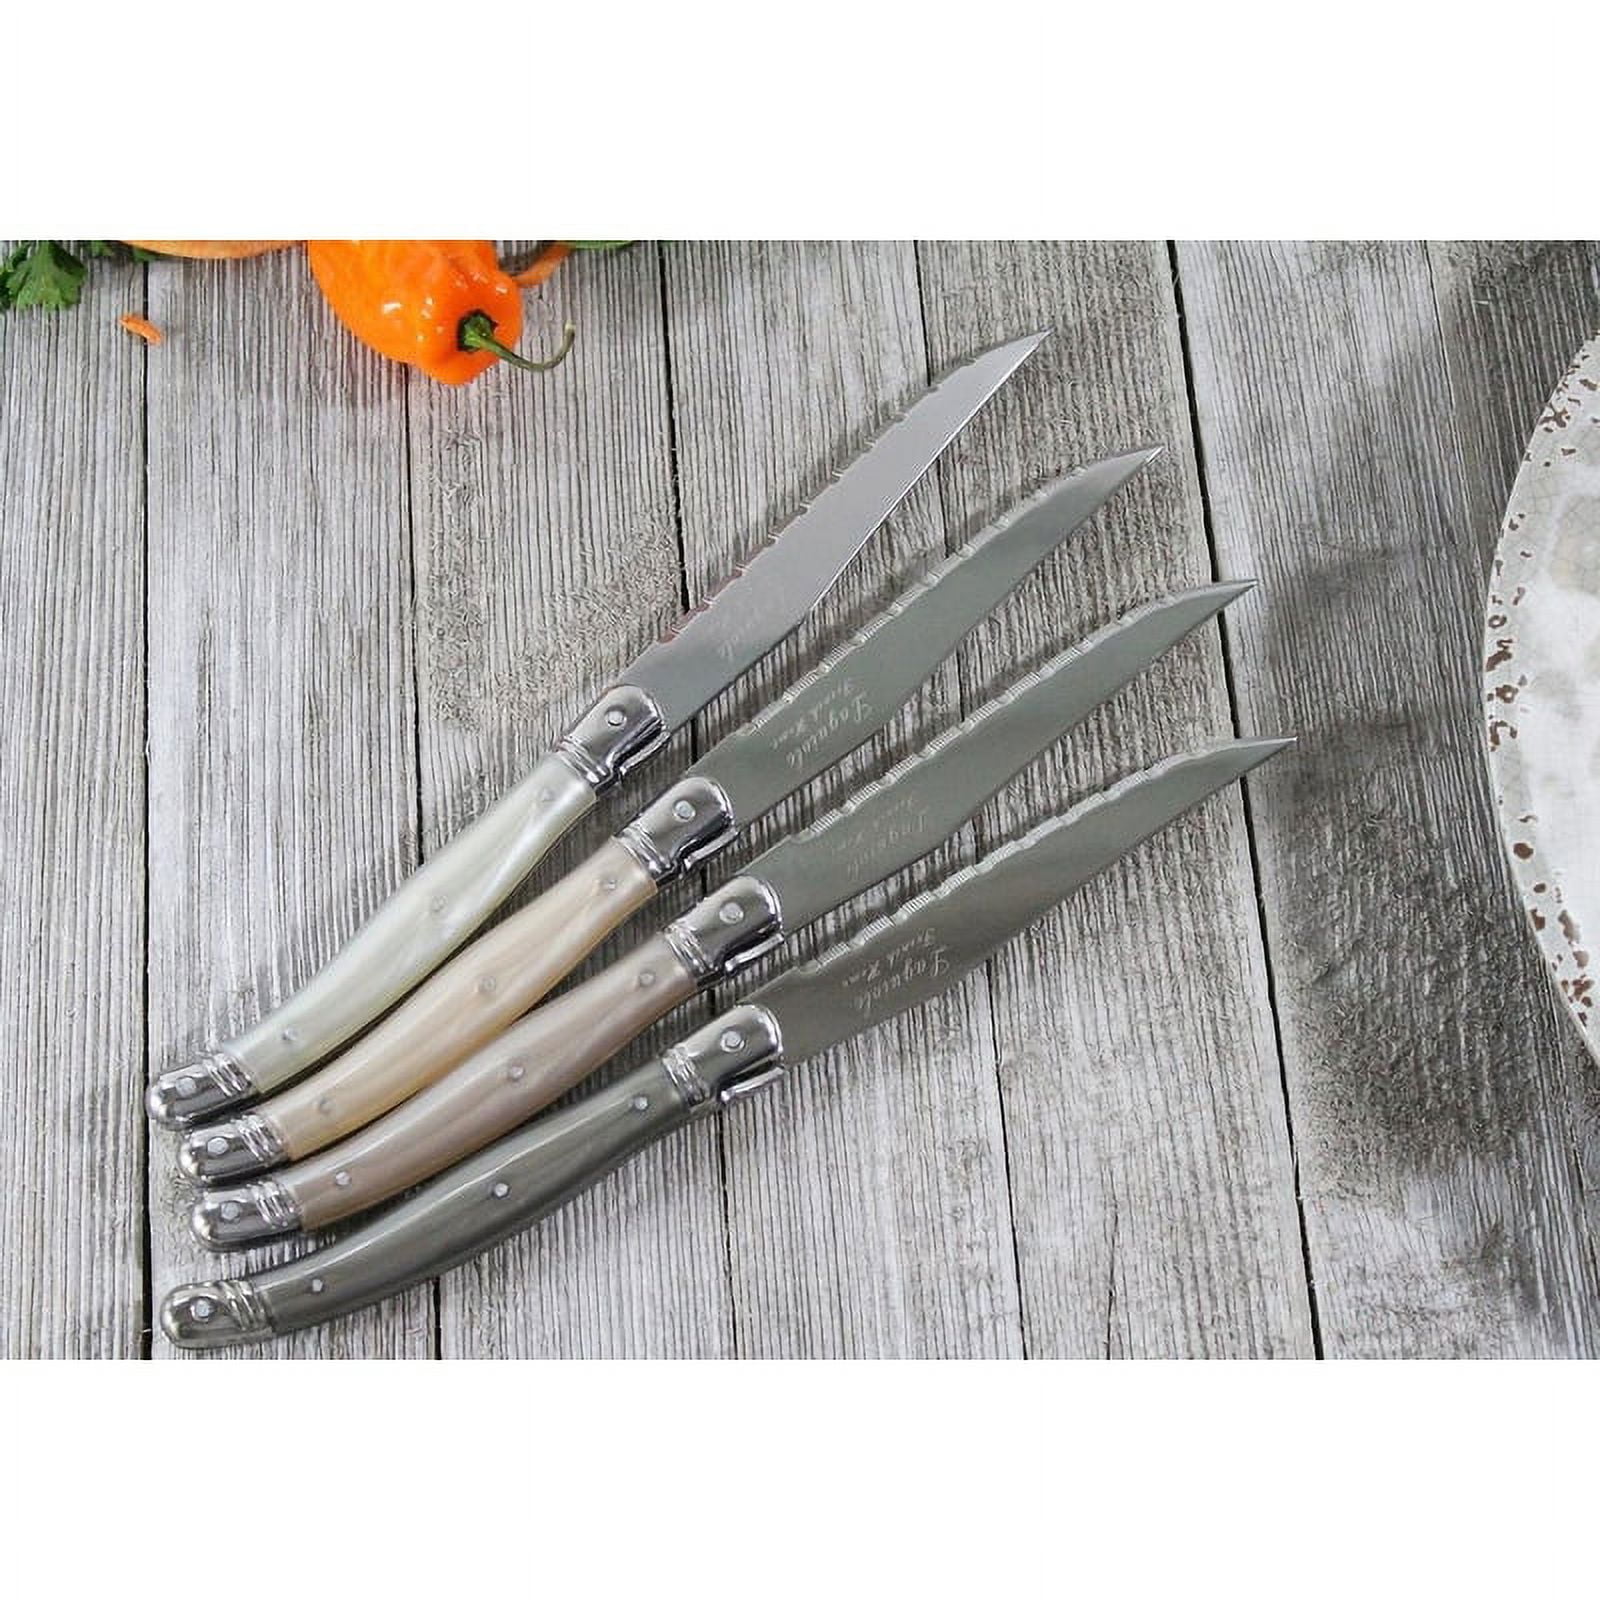 French Home Set of 4 Laguiole Neutral Tones Steak Knives 